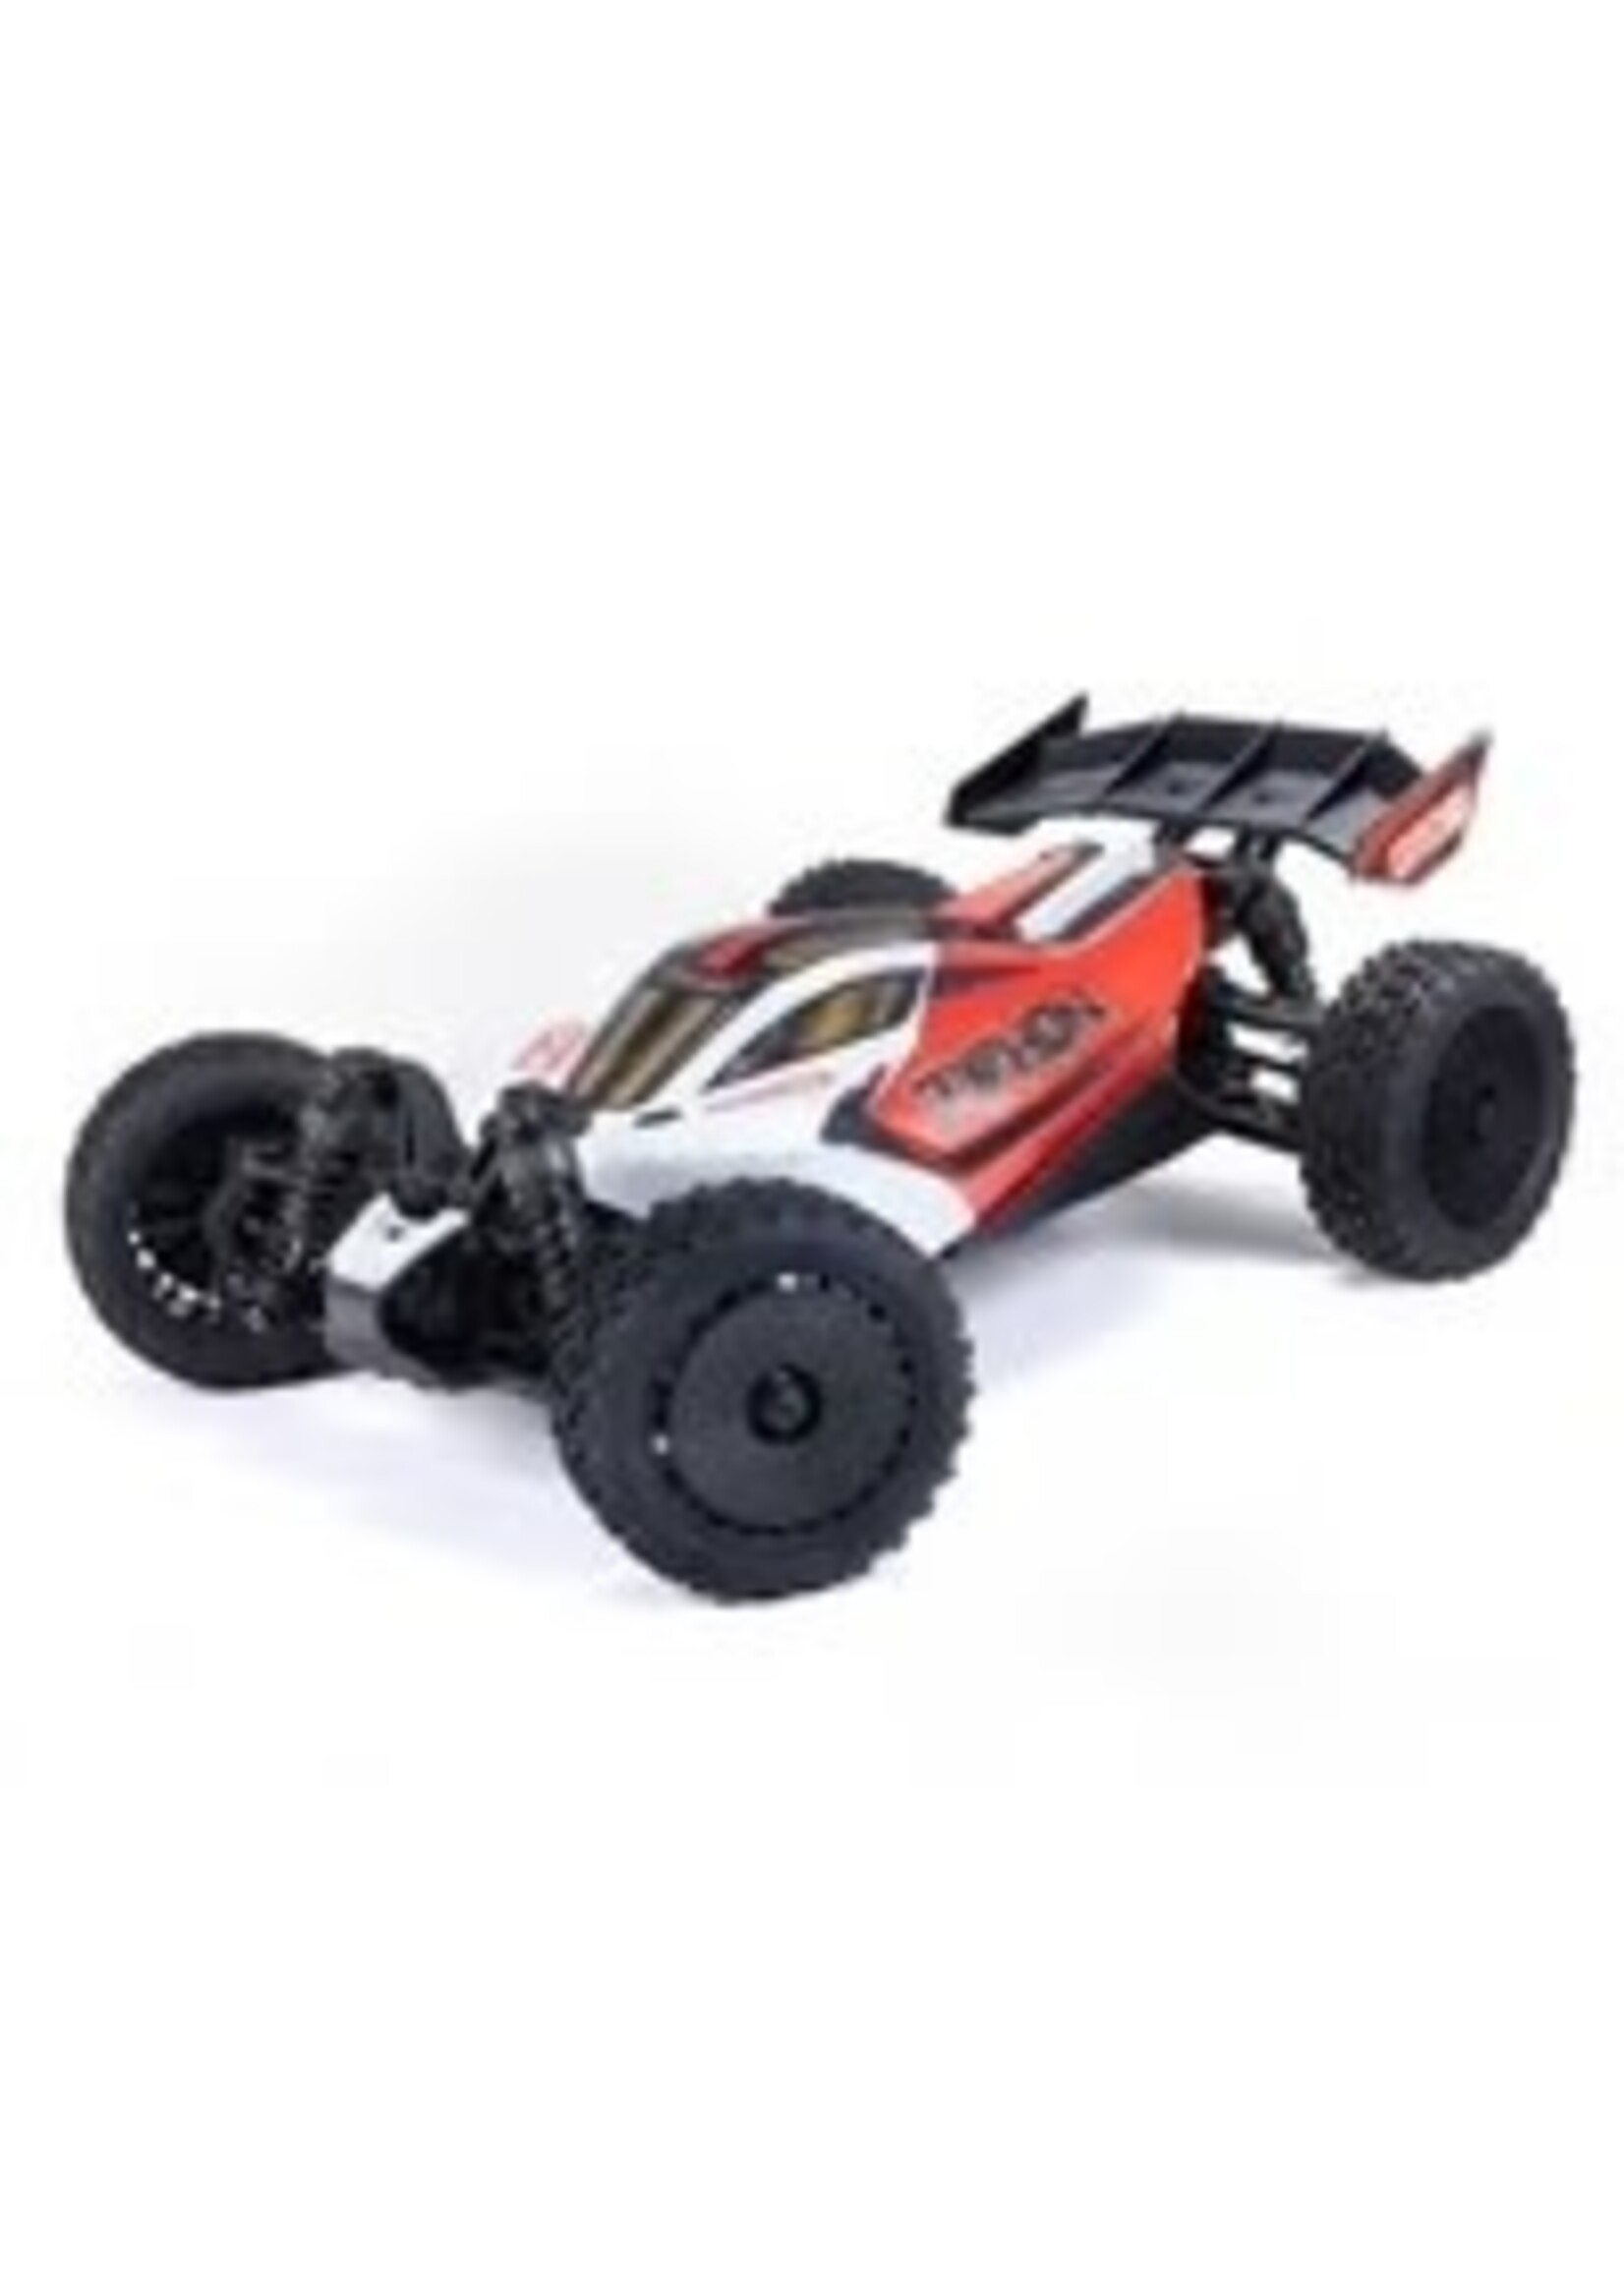 ARRMA ARA2106T2 TYPHON GROM MEGA 380 Brushed 4X4 Small Scale Buggy RTR with Battery & Charger, Red/Silver